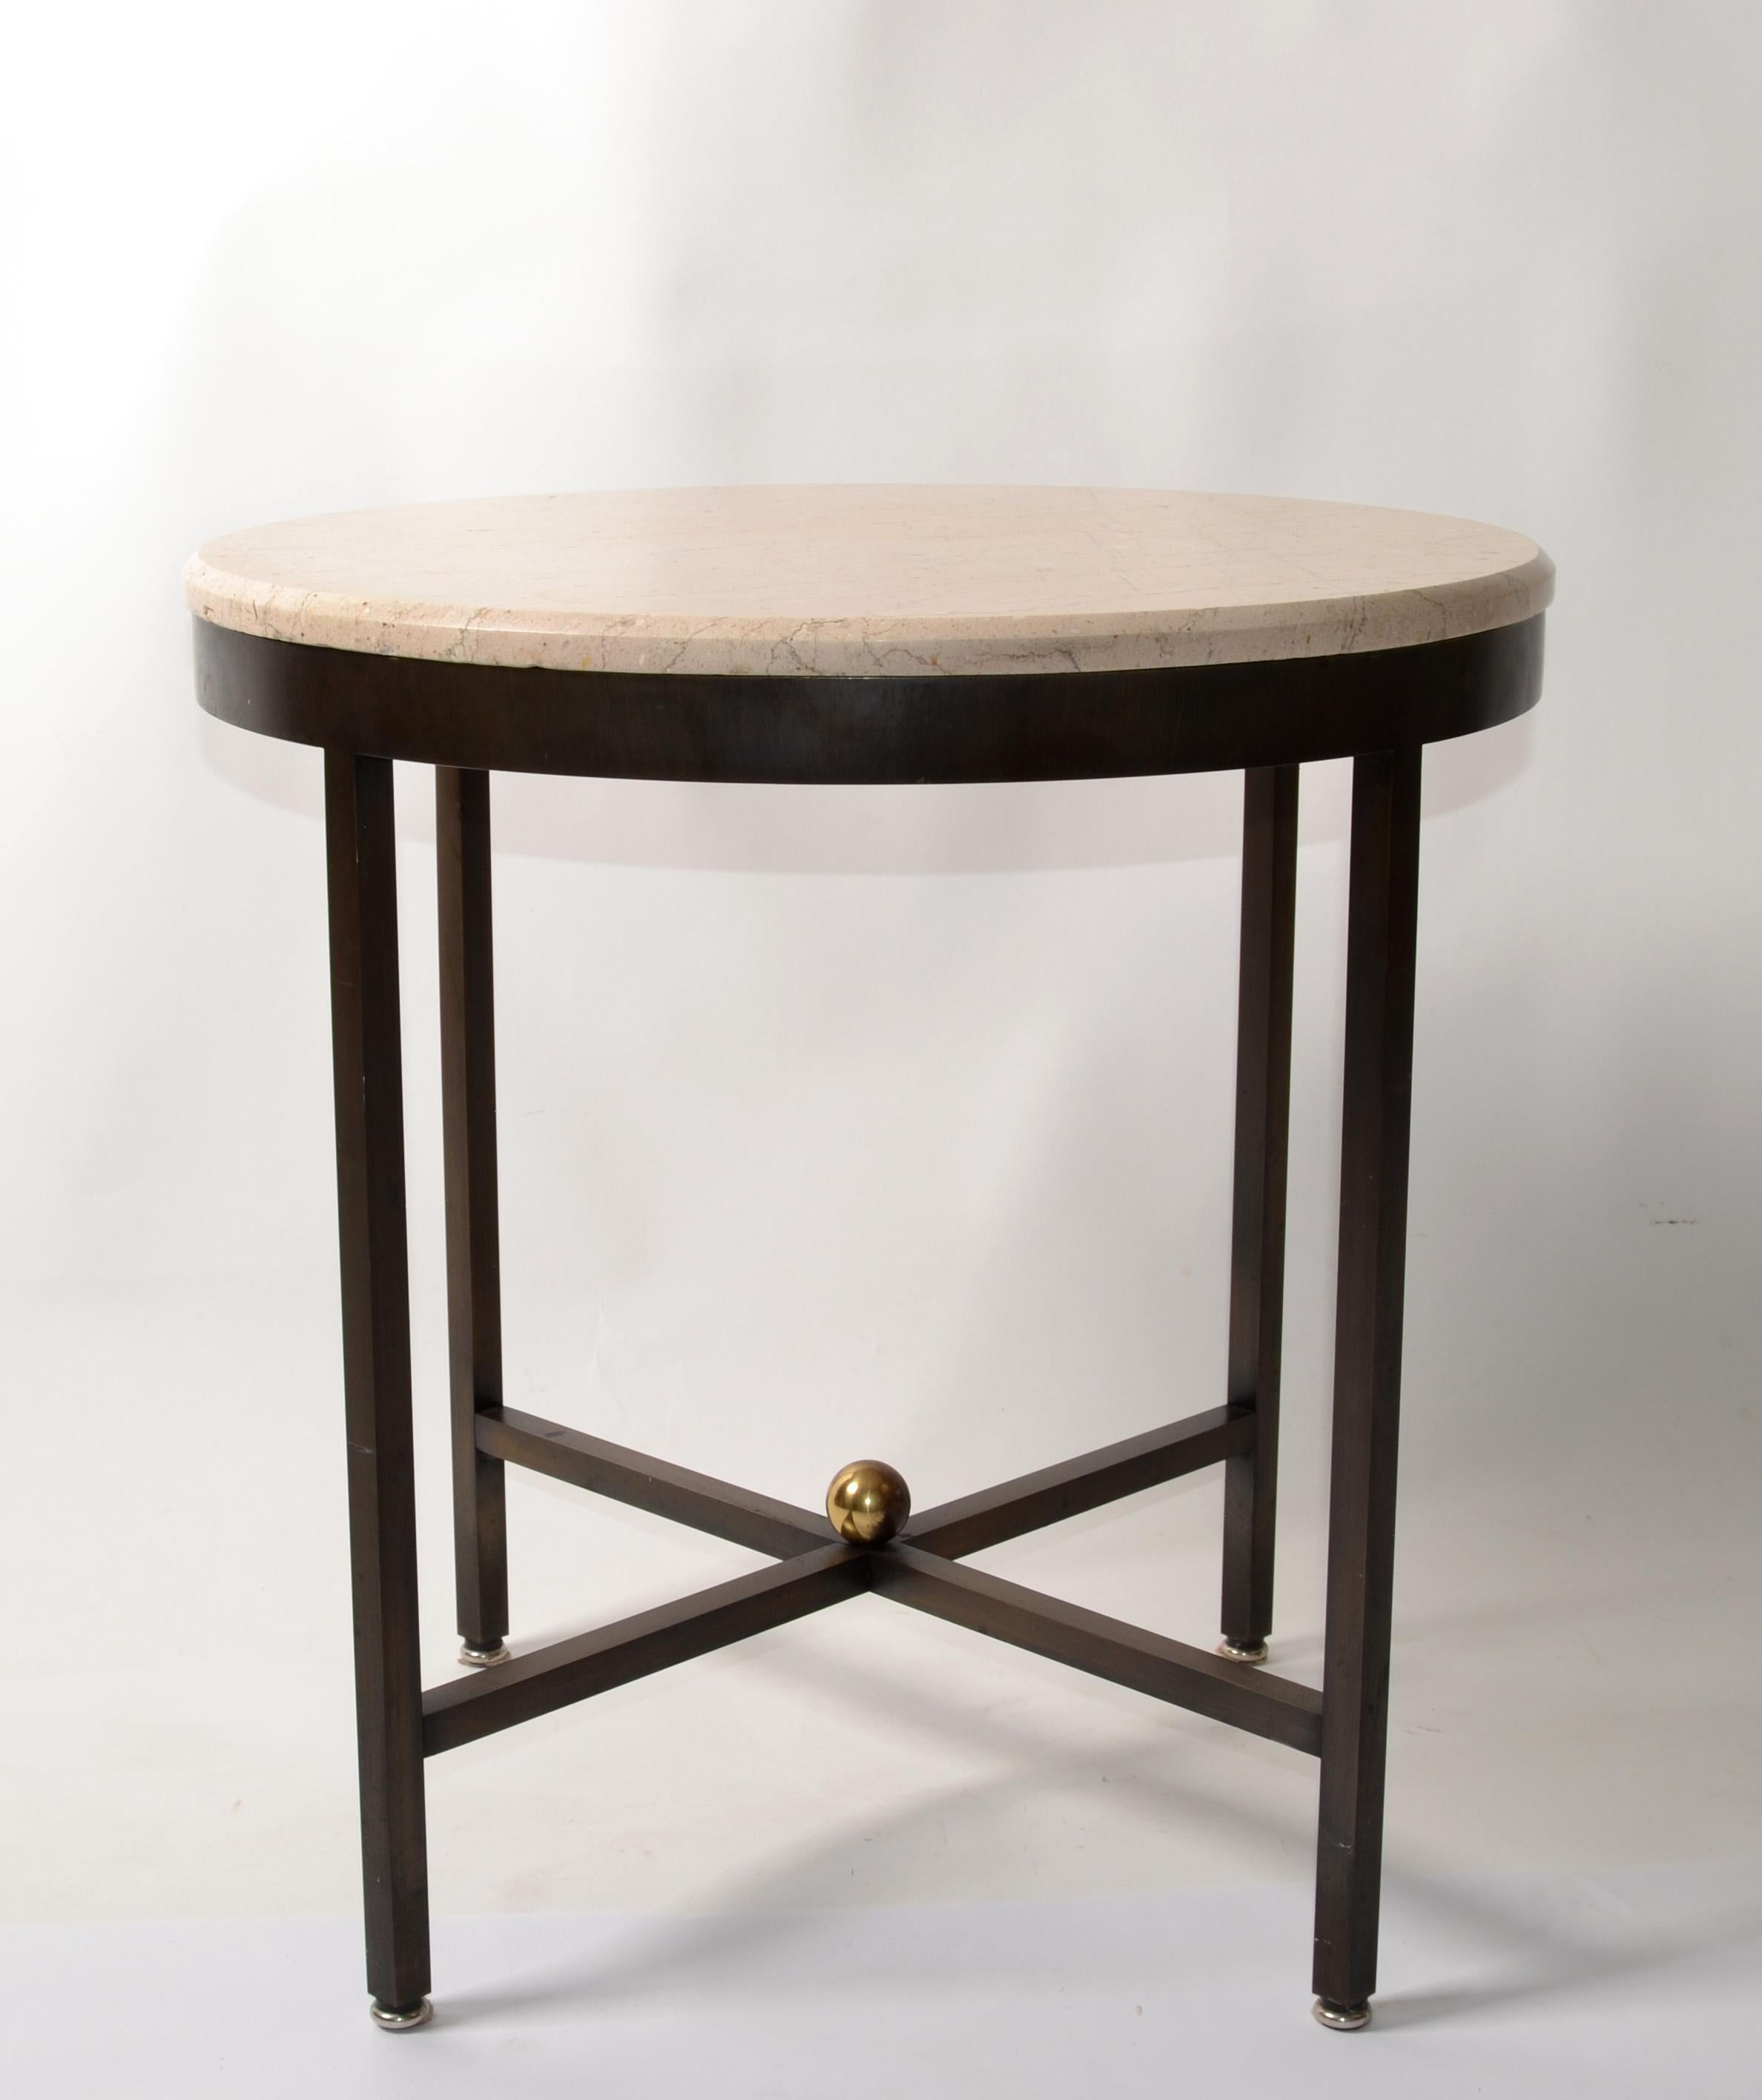 Mid-20th Century Roche Bobois Style round Bronze Side Table with cross Stretchers and a polished Ball Brass Finial.
The beveled Taupe Travertine Stone Top sits flush on the sturdy solid Bronze Base.
Made in Europe from Master Metalworkers attributed